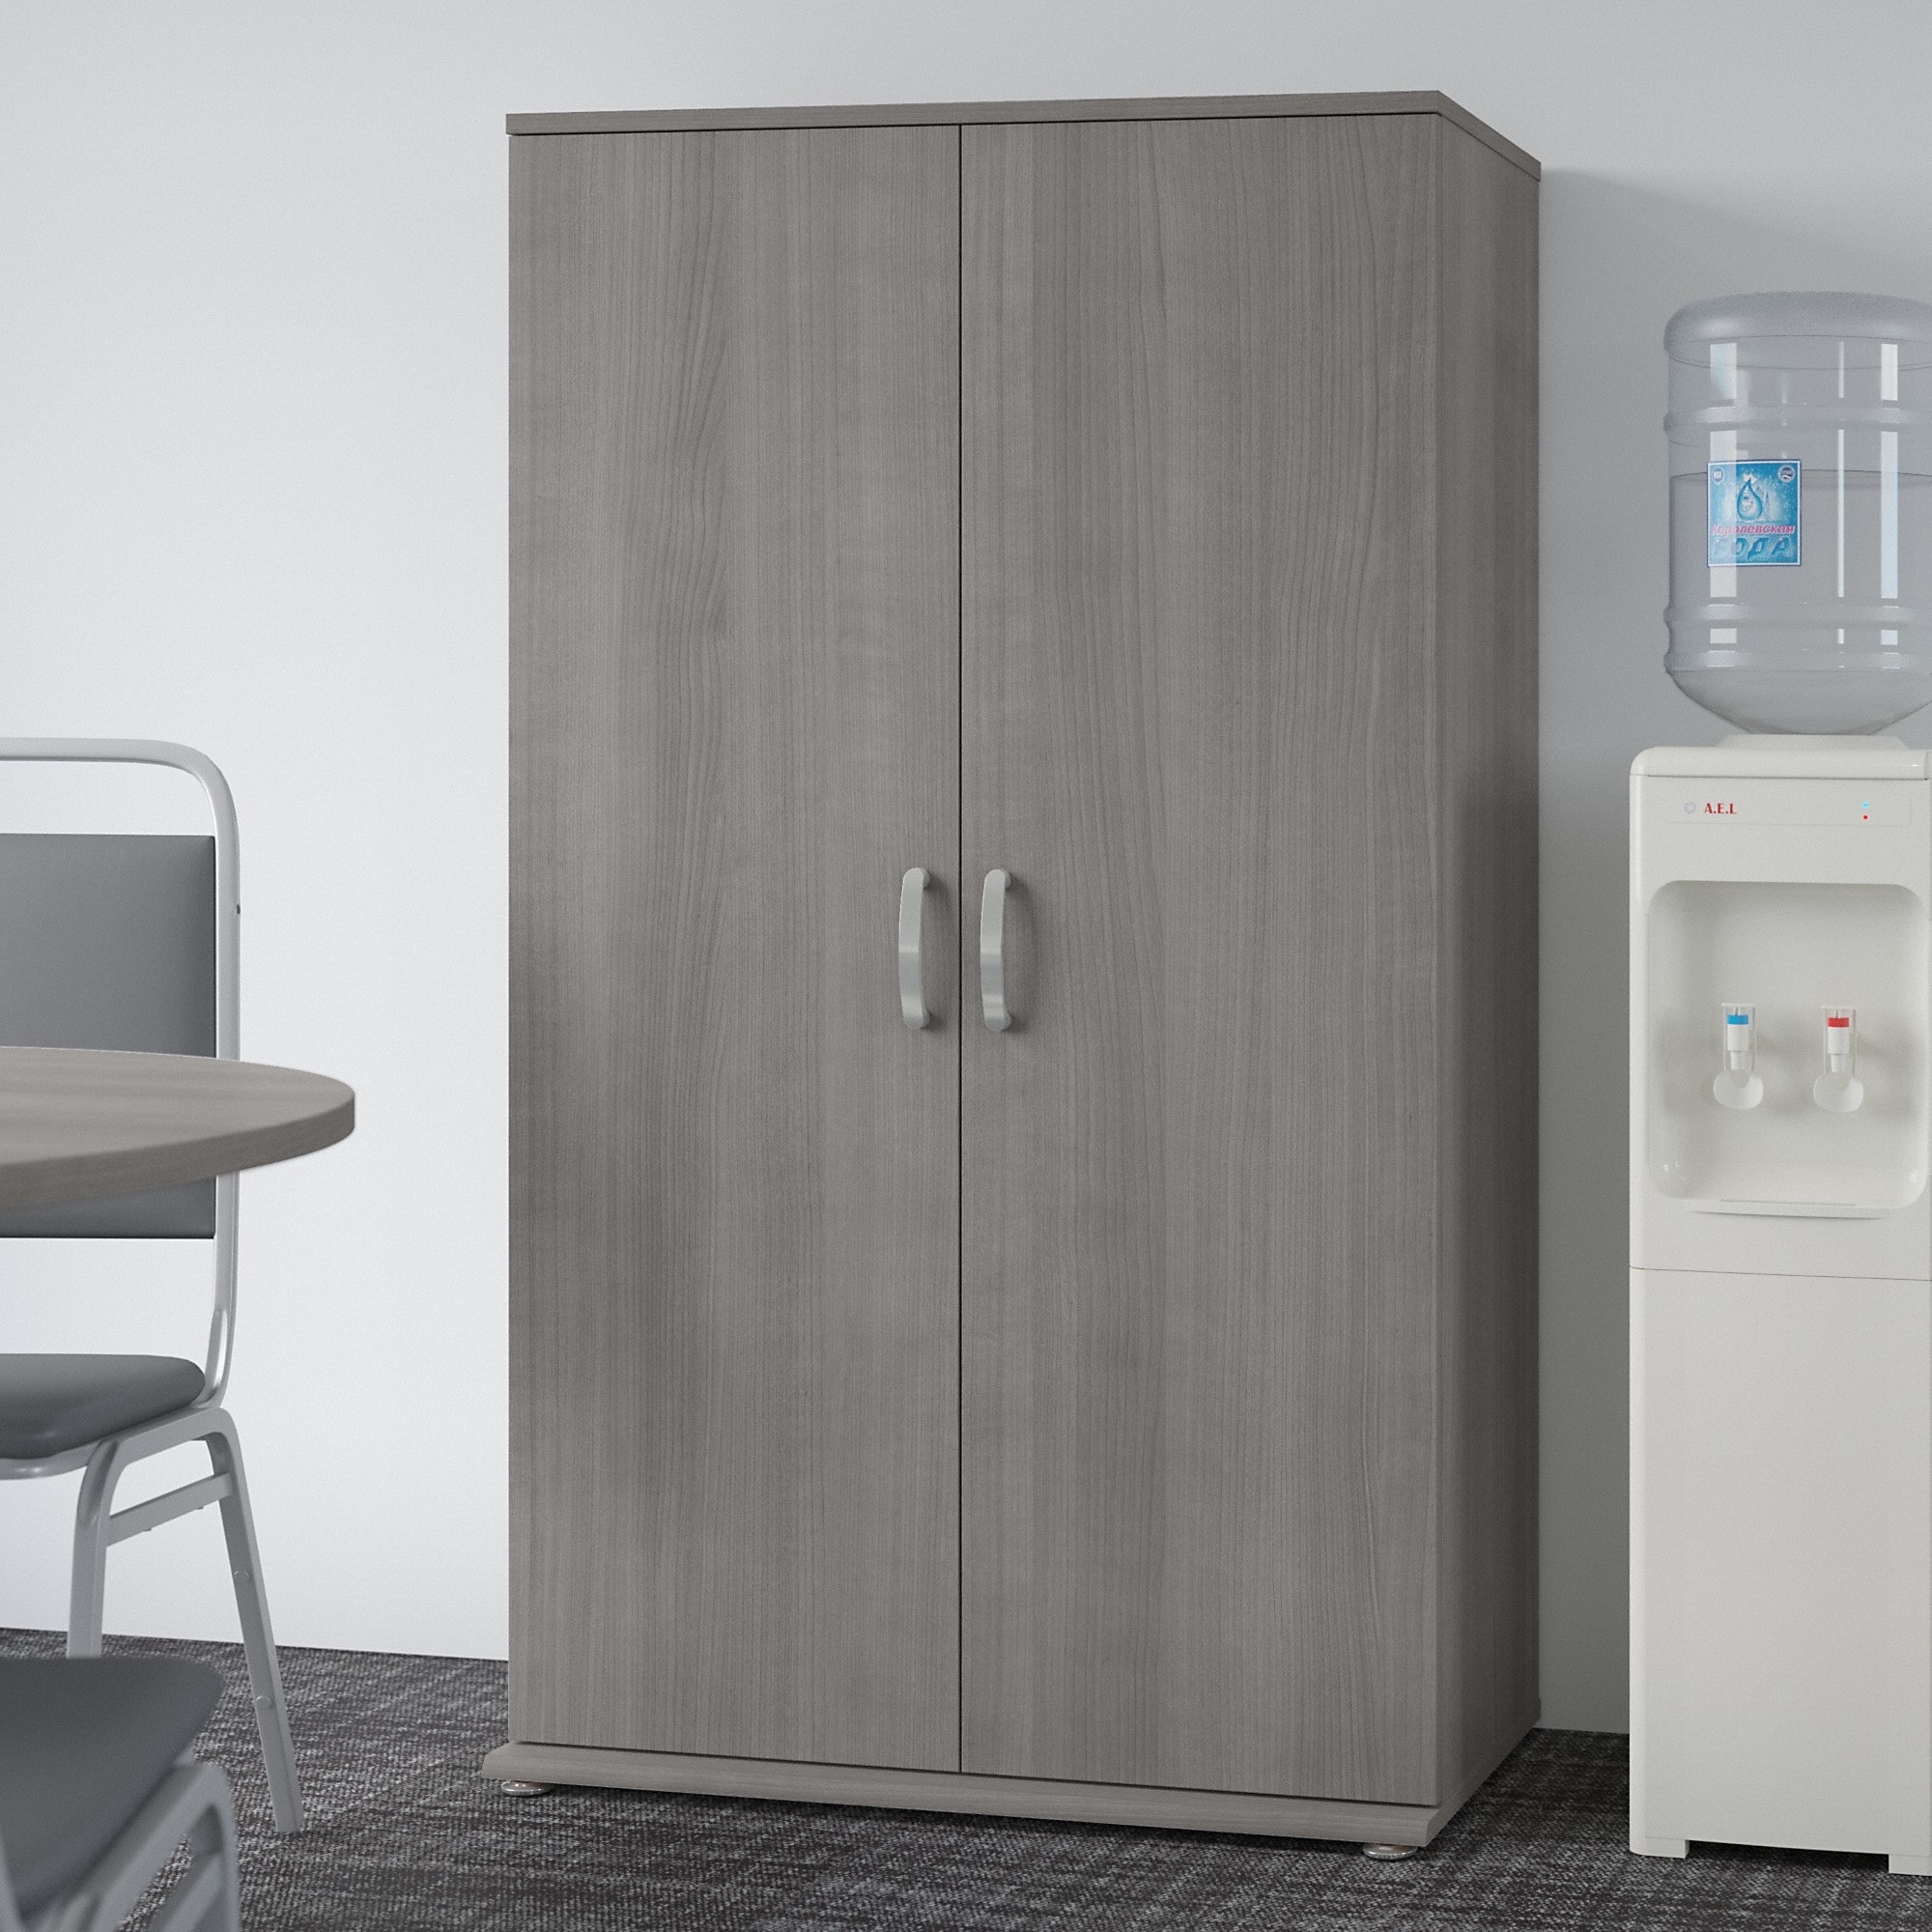 https://ak1.ostkcdn.com/images/products/is/images/direct/f2fa9e995ef3a7d2ff424fc95c3e9dc75029d870/Universal-Tall-Storage-Cabinet-with-Doors-by-Bush-Business-Furniture.jpg